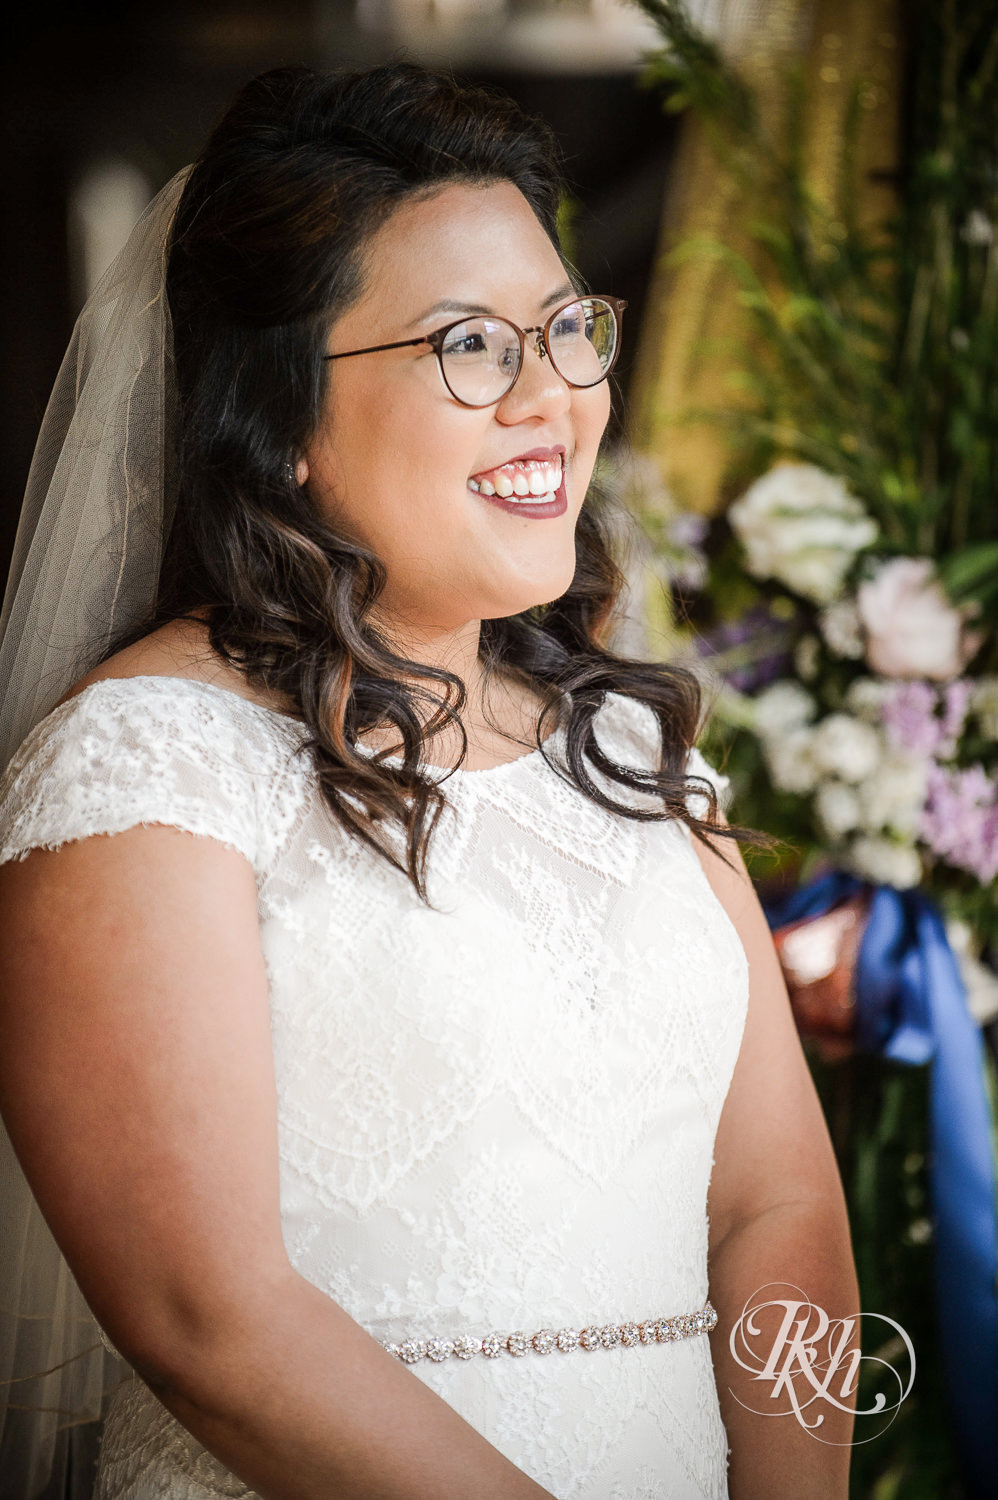 Asian bride with glasses and groom smile during wedding ceremony at 612 Brew in Minneapolis, Minnesota.